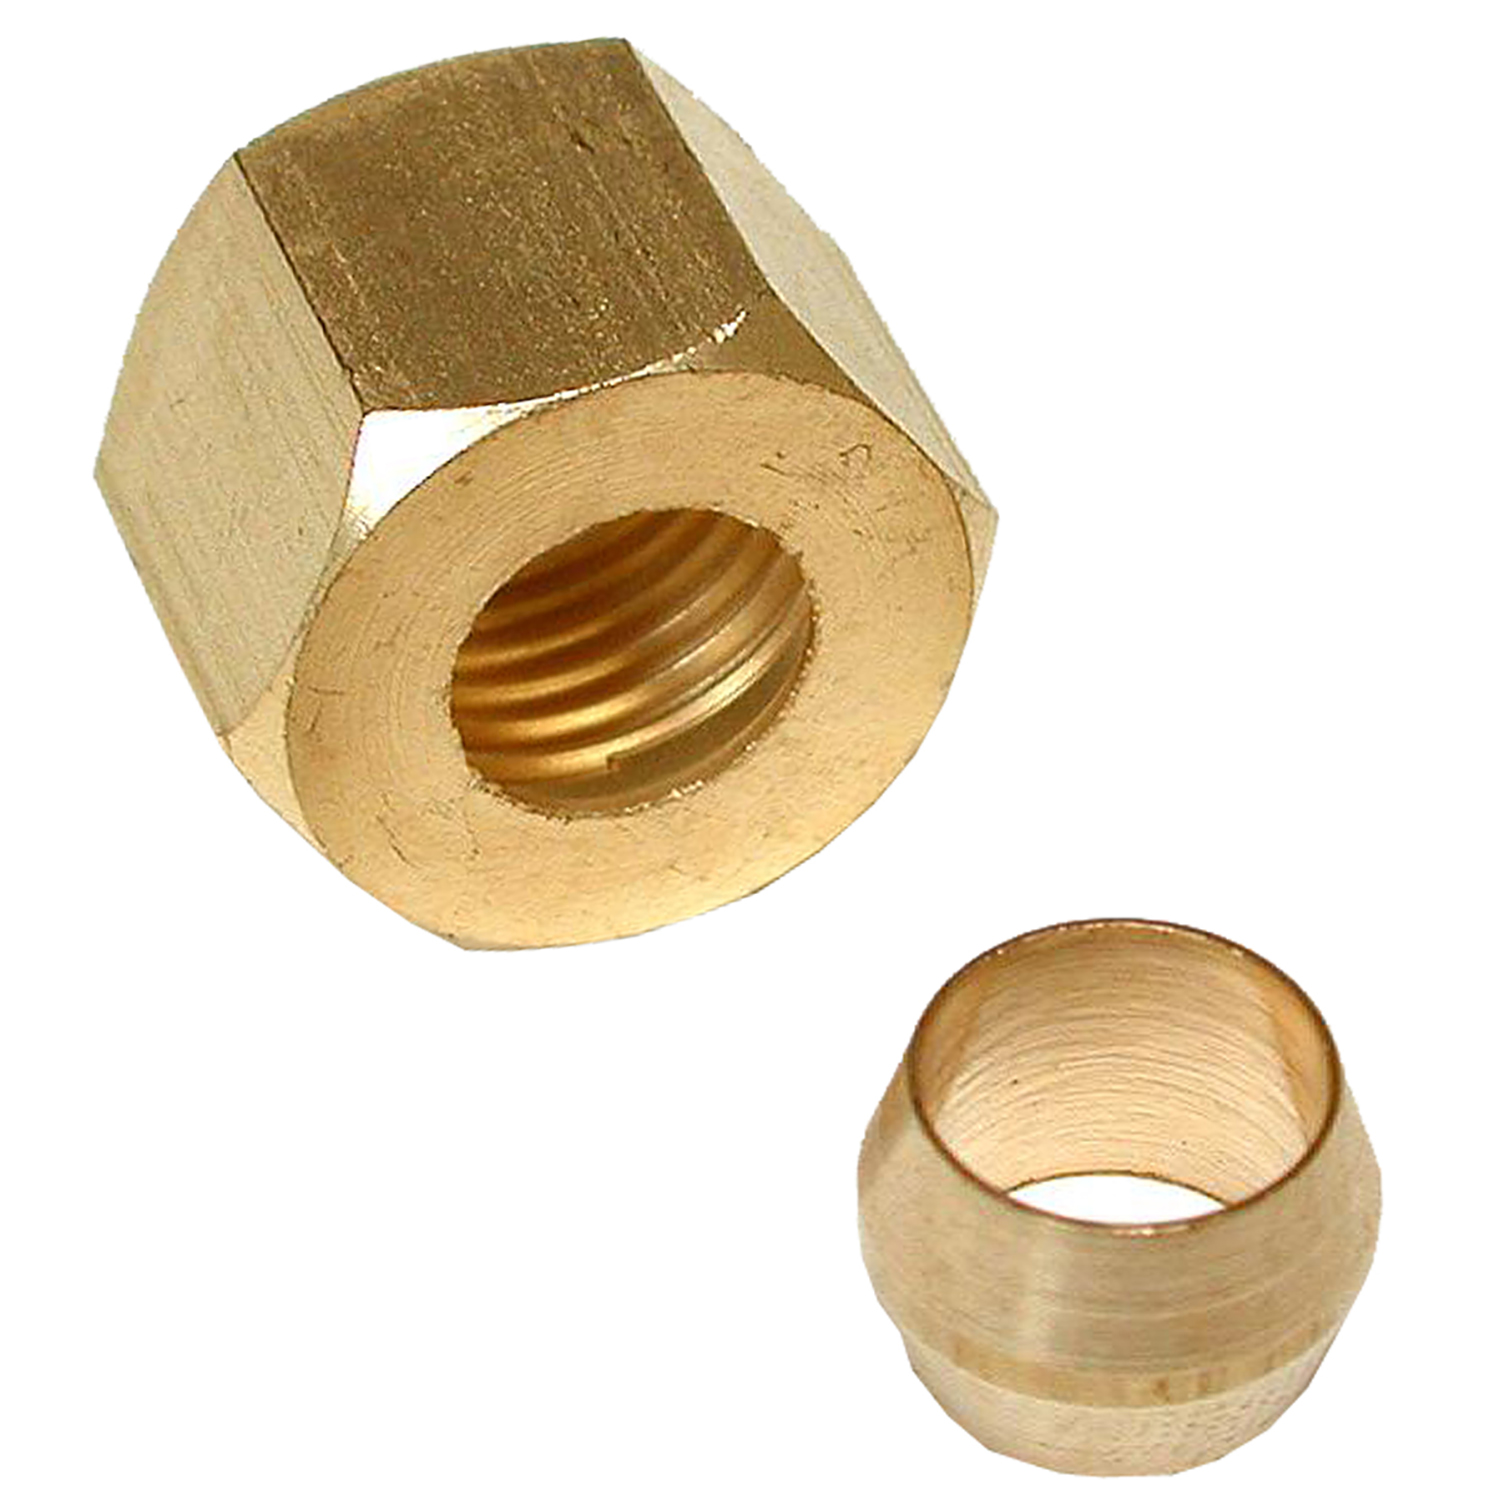 Lasco 17-6115 Nut and Sleeve, 1/4 in, Compression, Brass